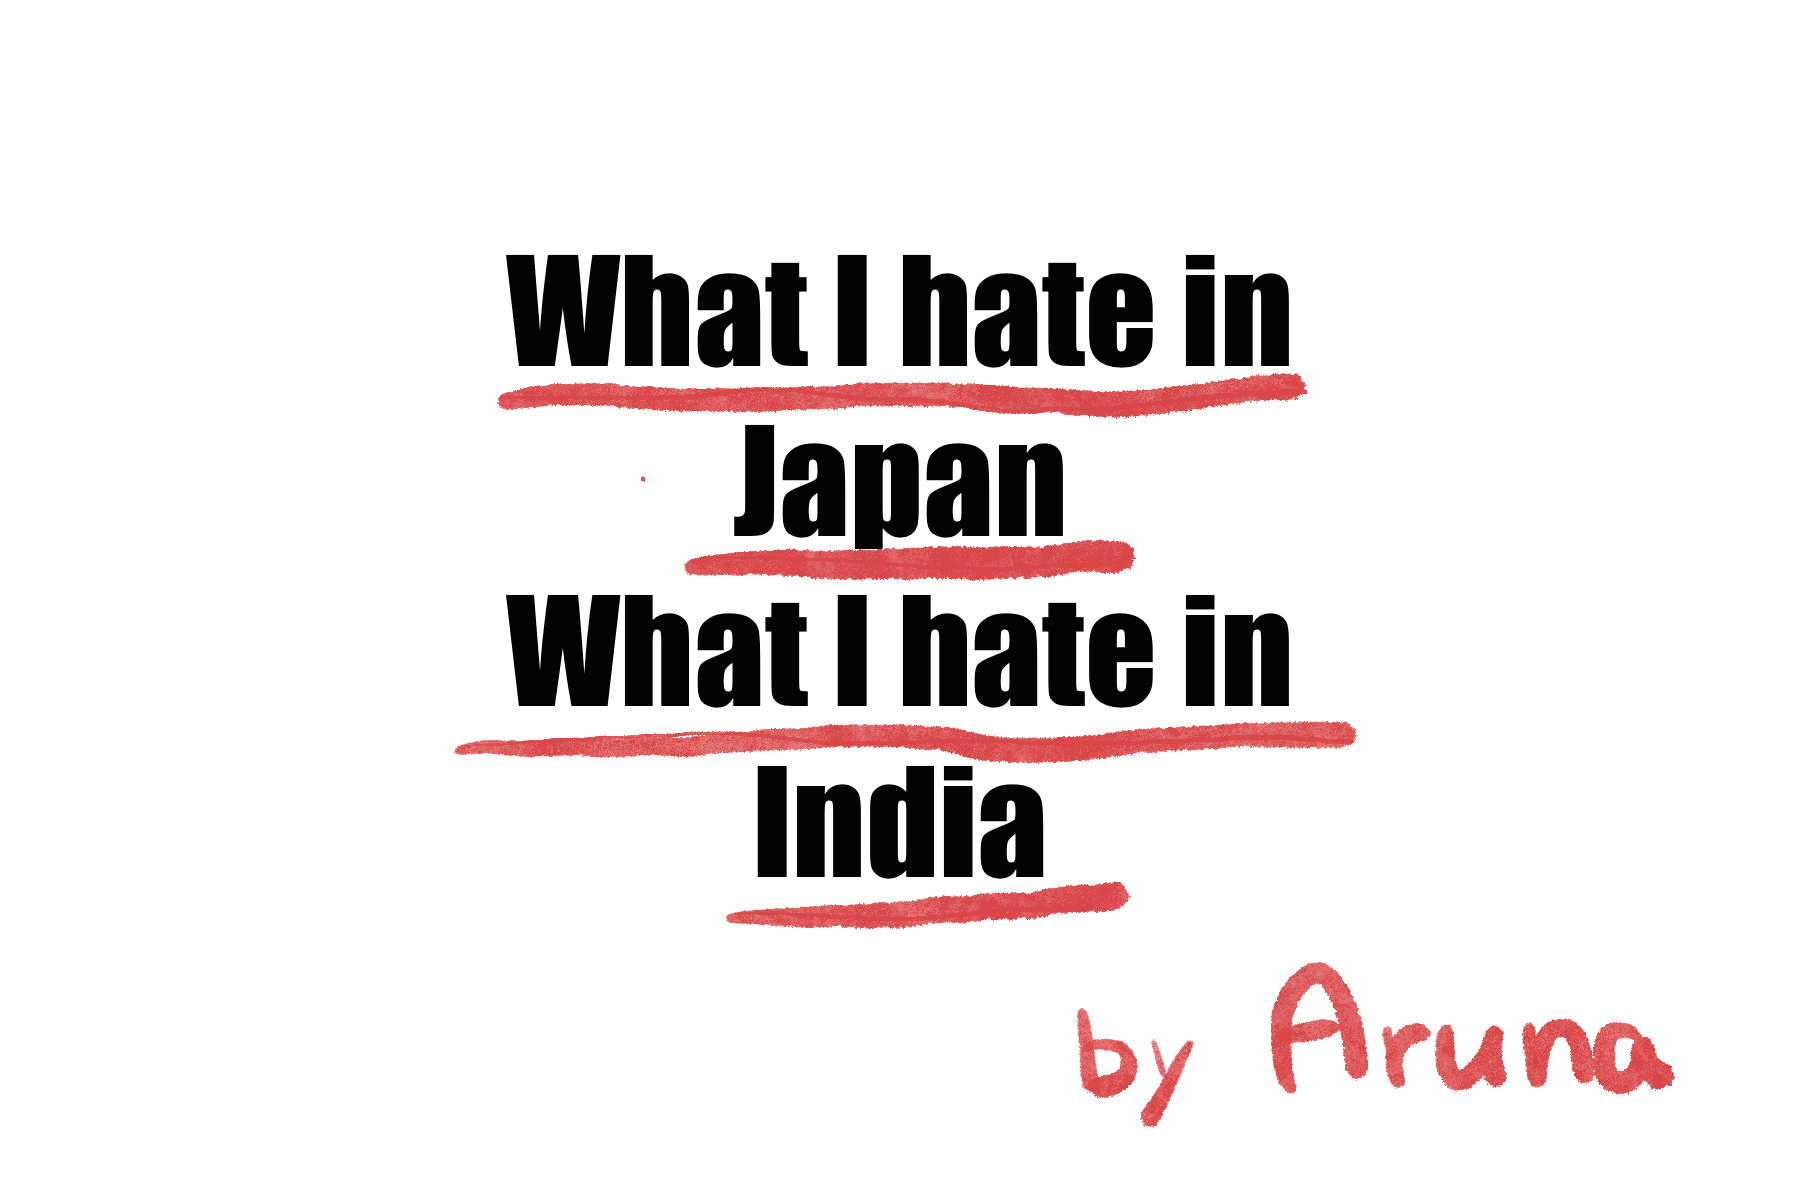 What I hate in Japan, What I hate in India